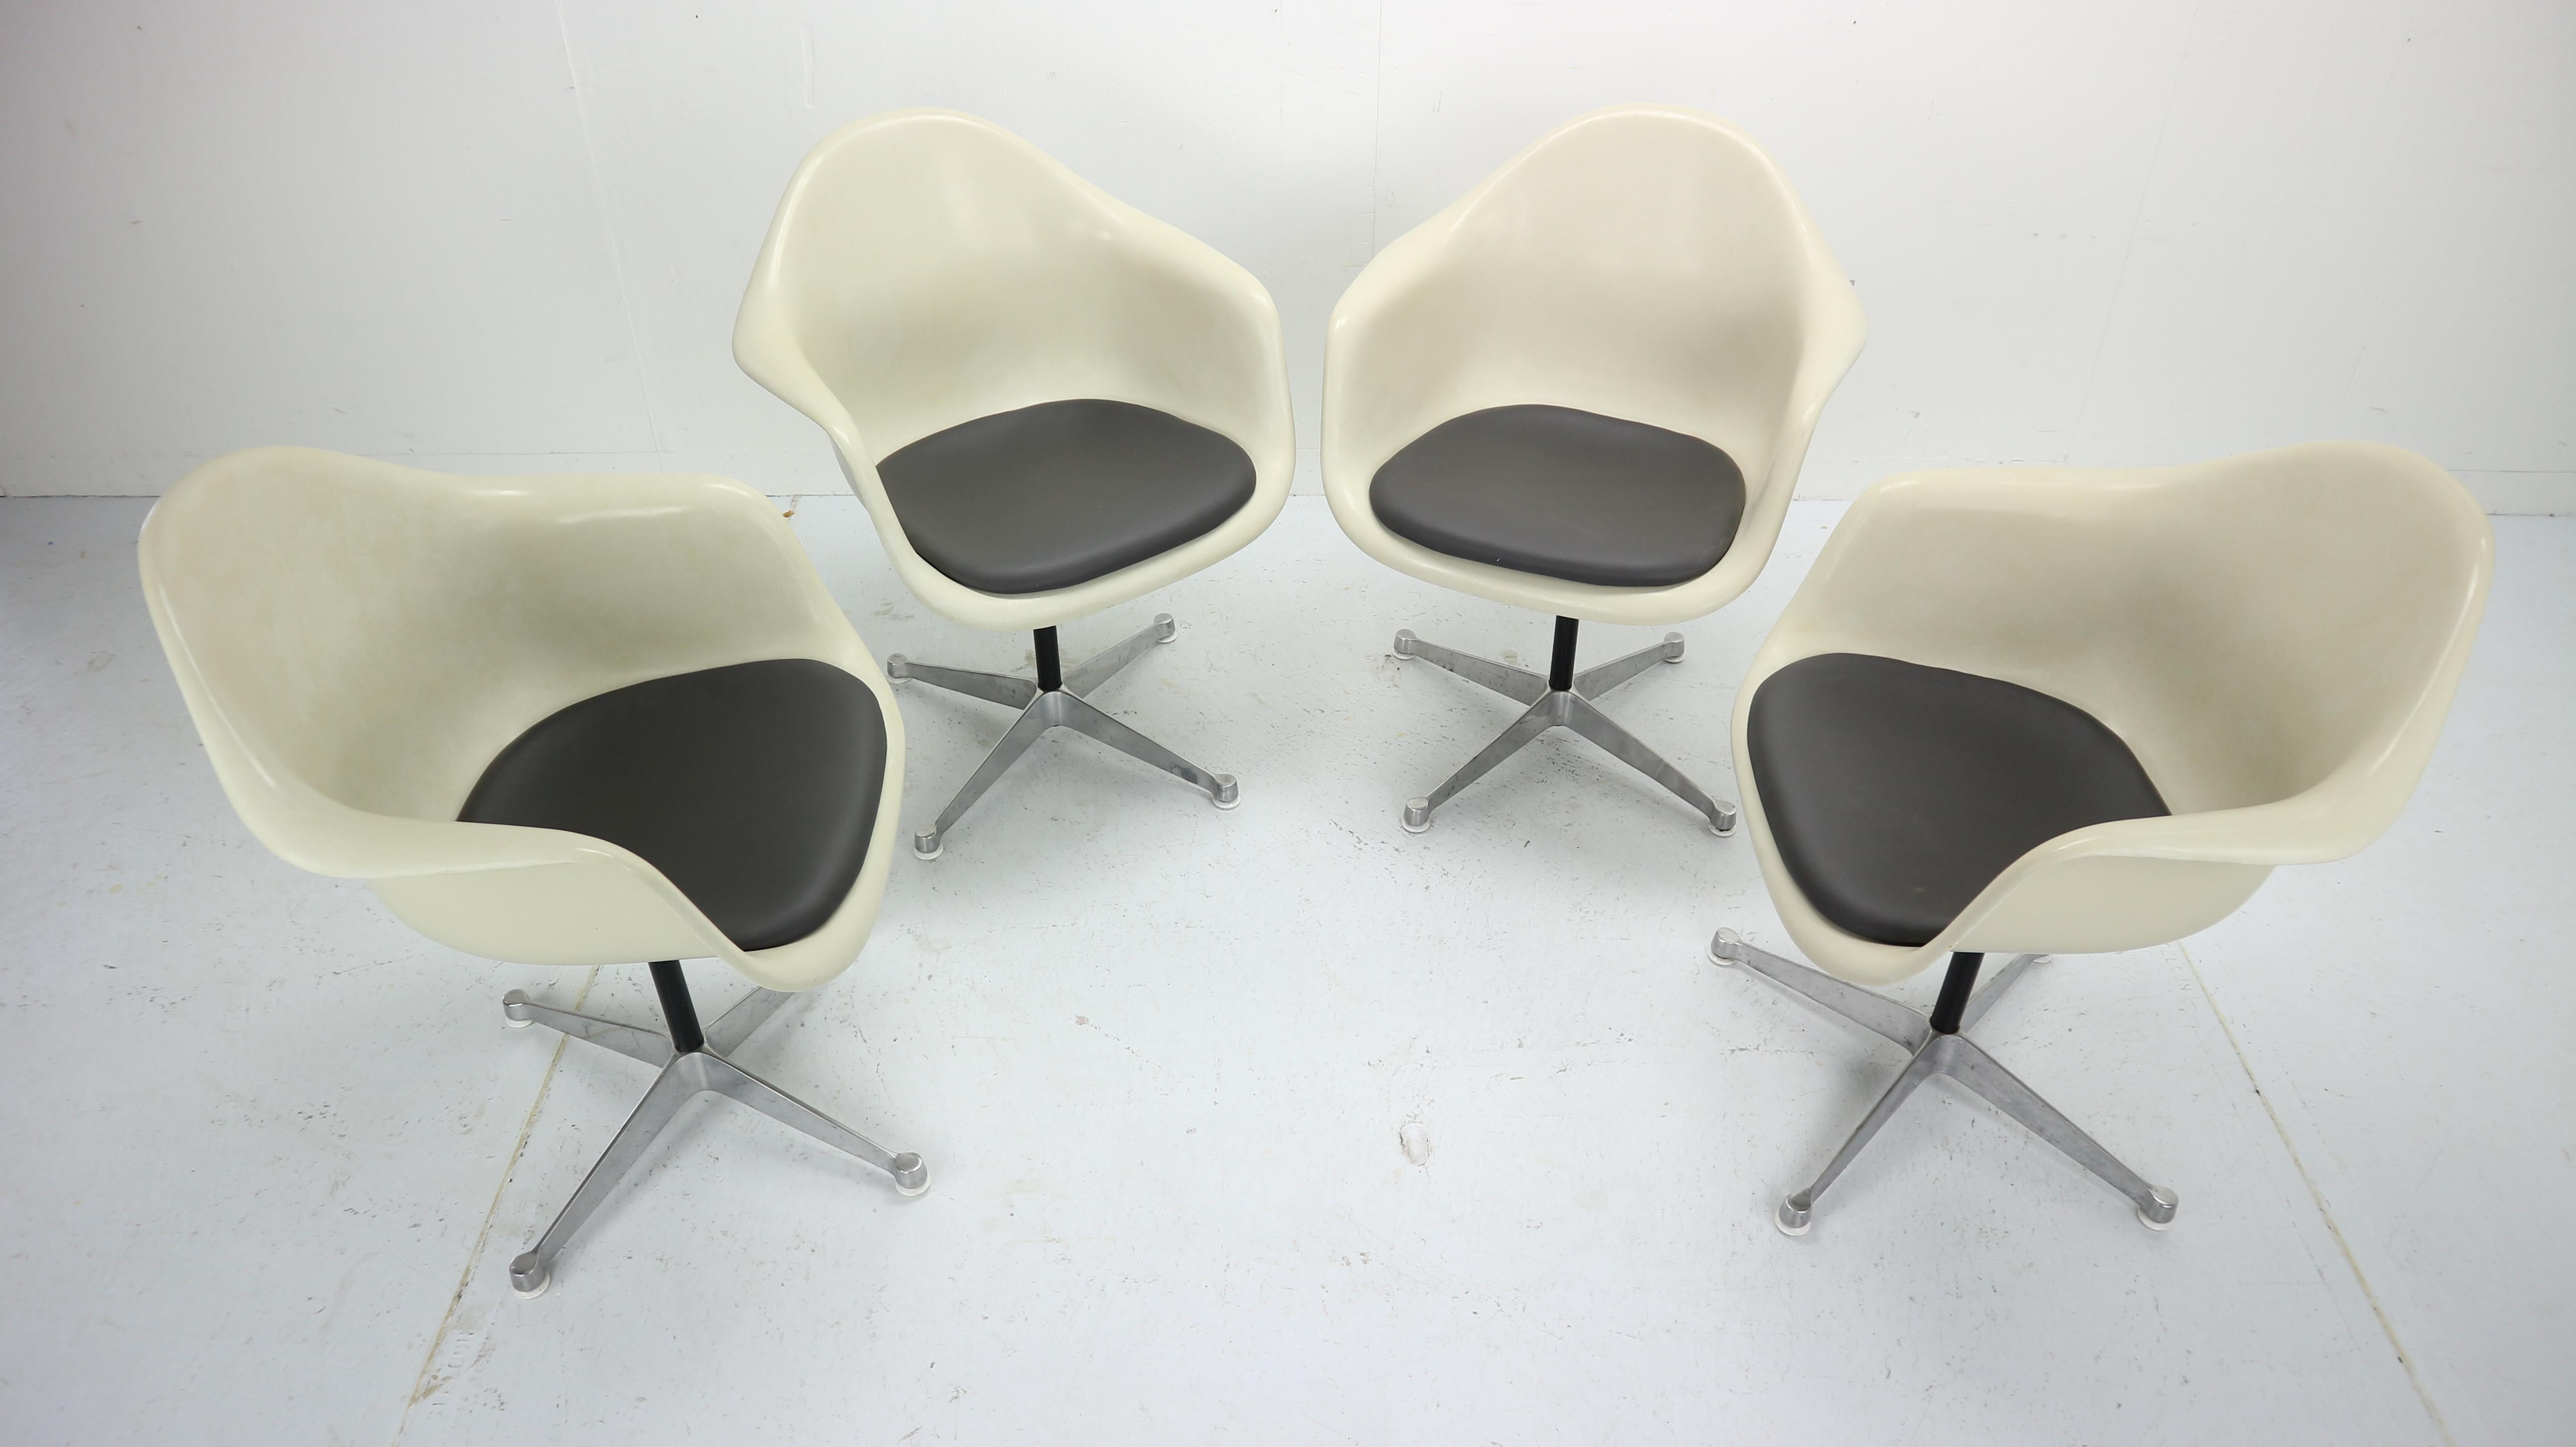 Aluminum Set of 4 Bucket Swivel Chairs & Dinning Table by Charles Eames for Herman Miller